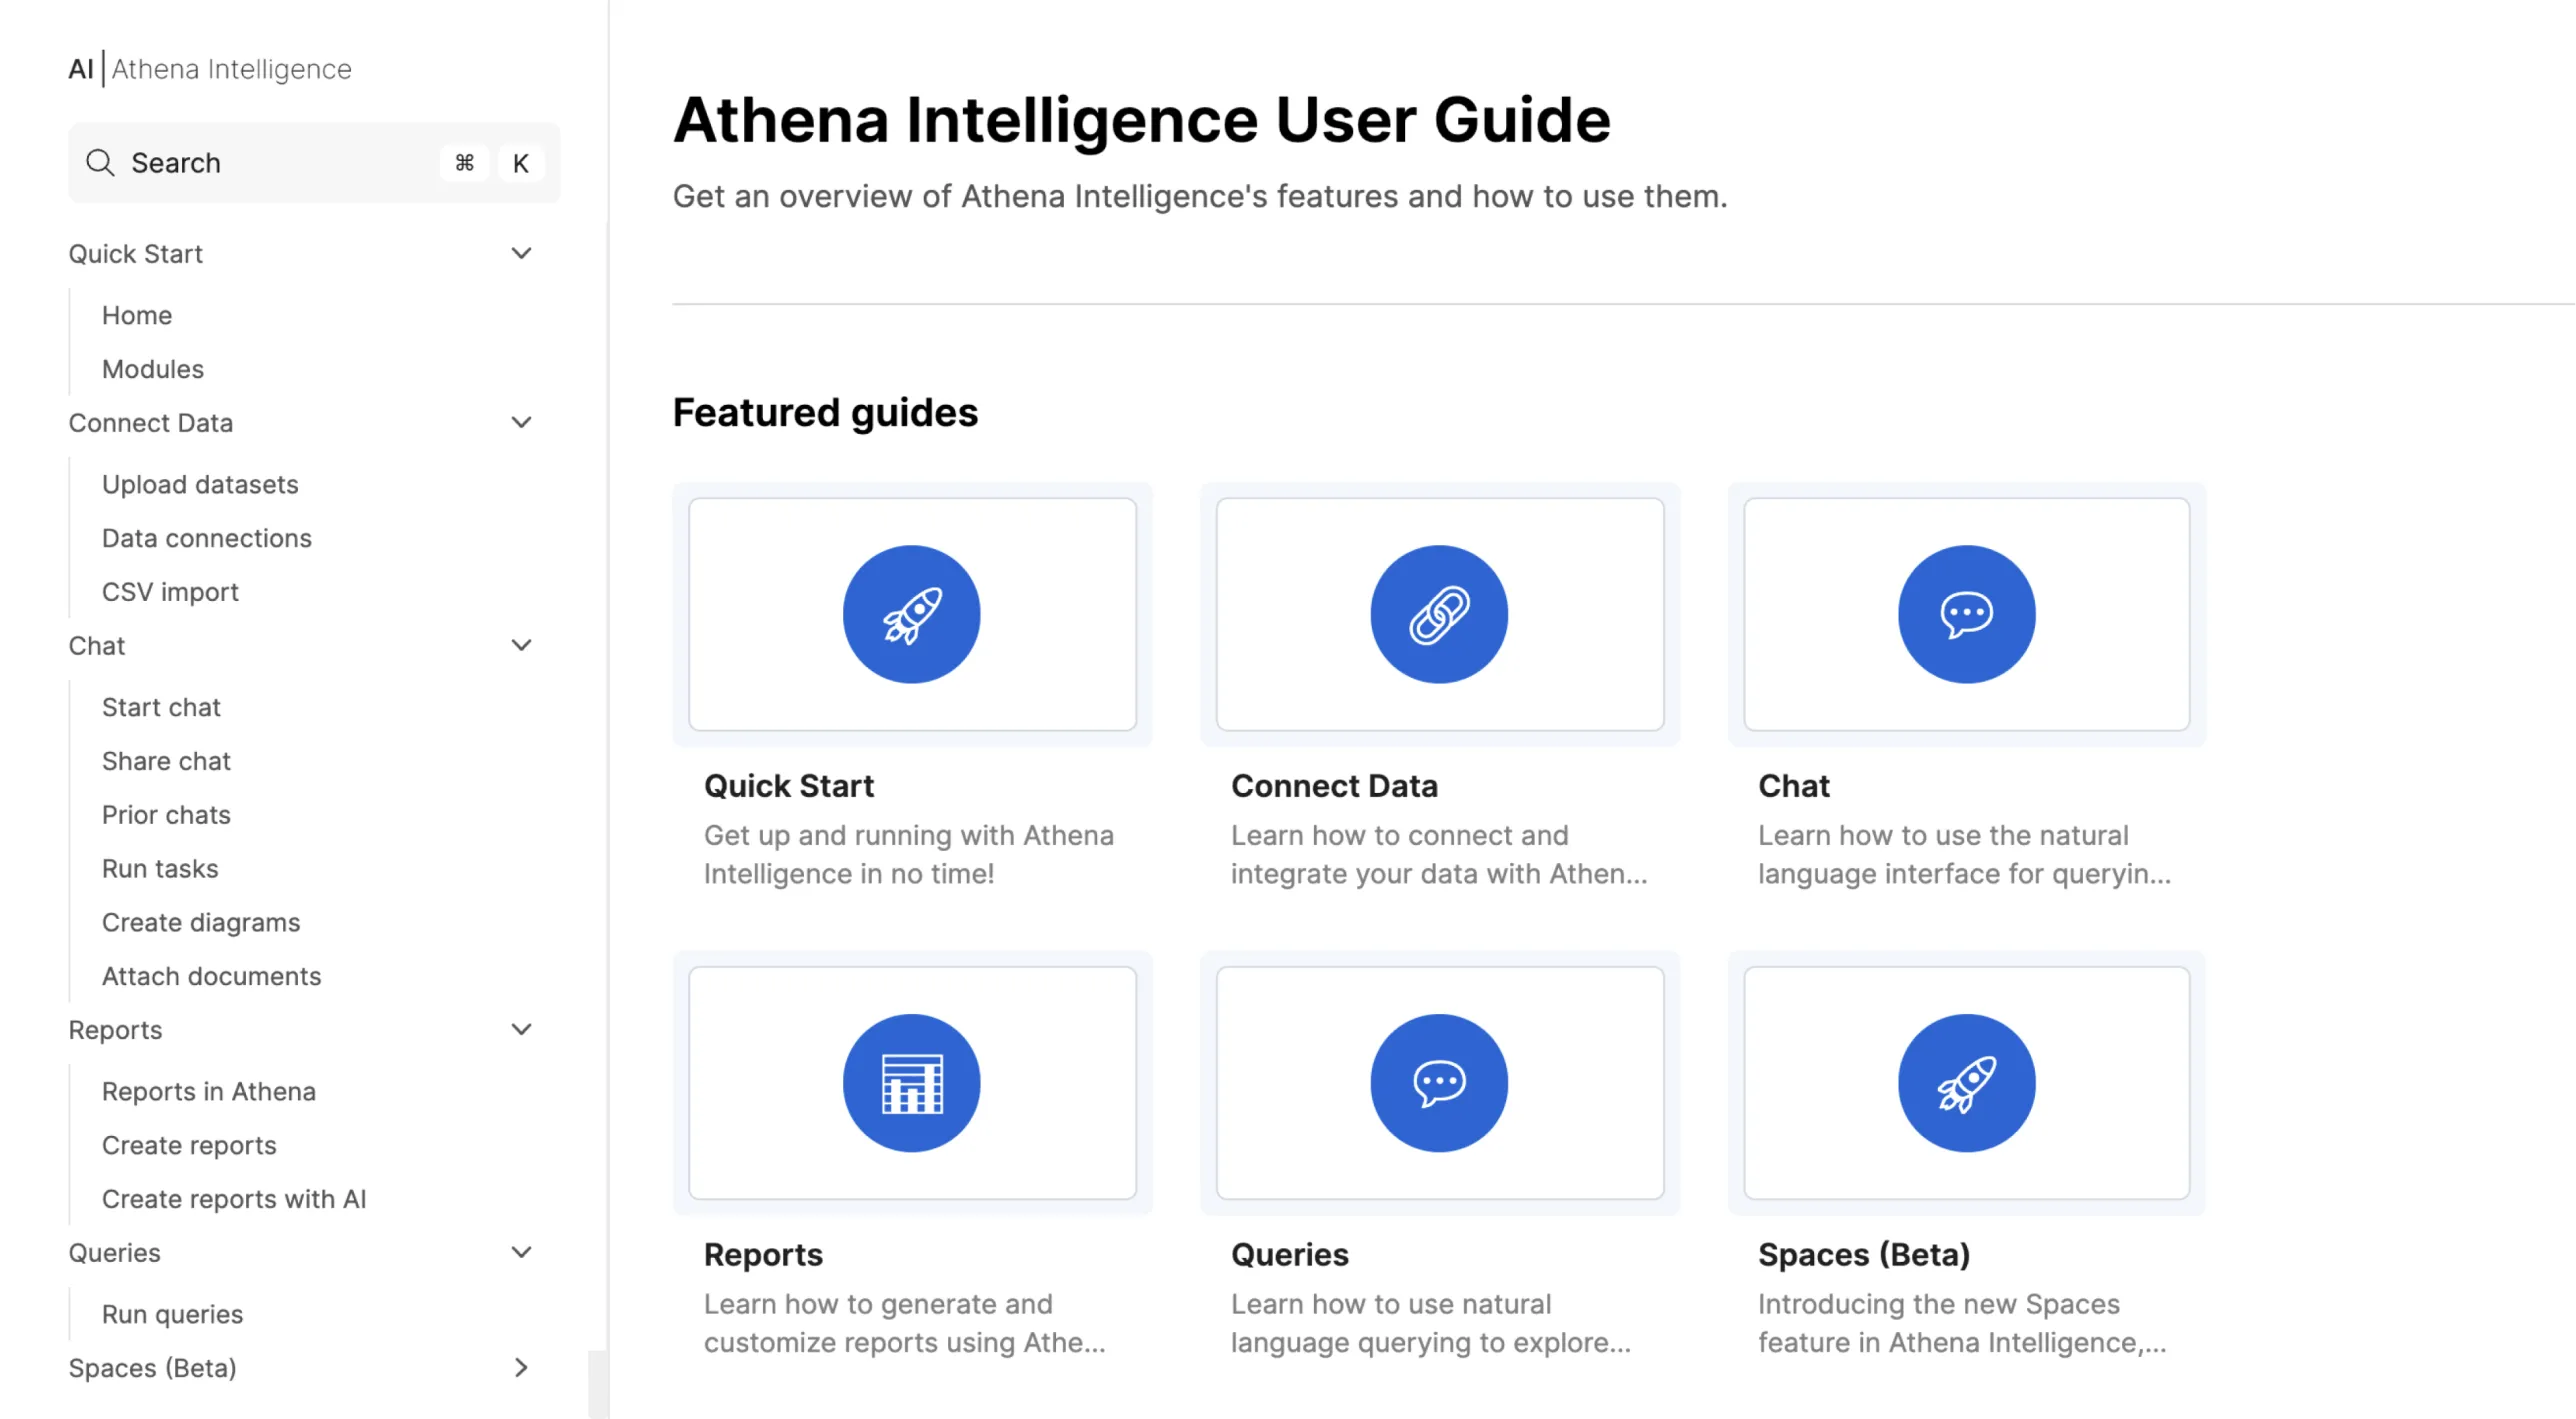 A visual case study showing Athena Intelligence published content on DocsHound. Athena, an enterprise data intelligence SaaS platform, use DocsHound to provide step-by-steps, FAQs, and well designed and laid out automatically created documentation to serve their SaaS userbase.